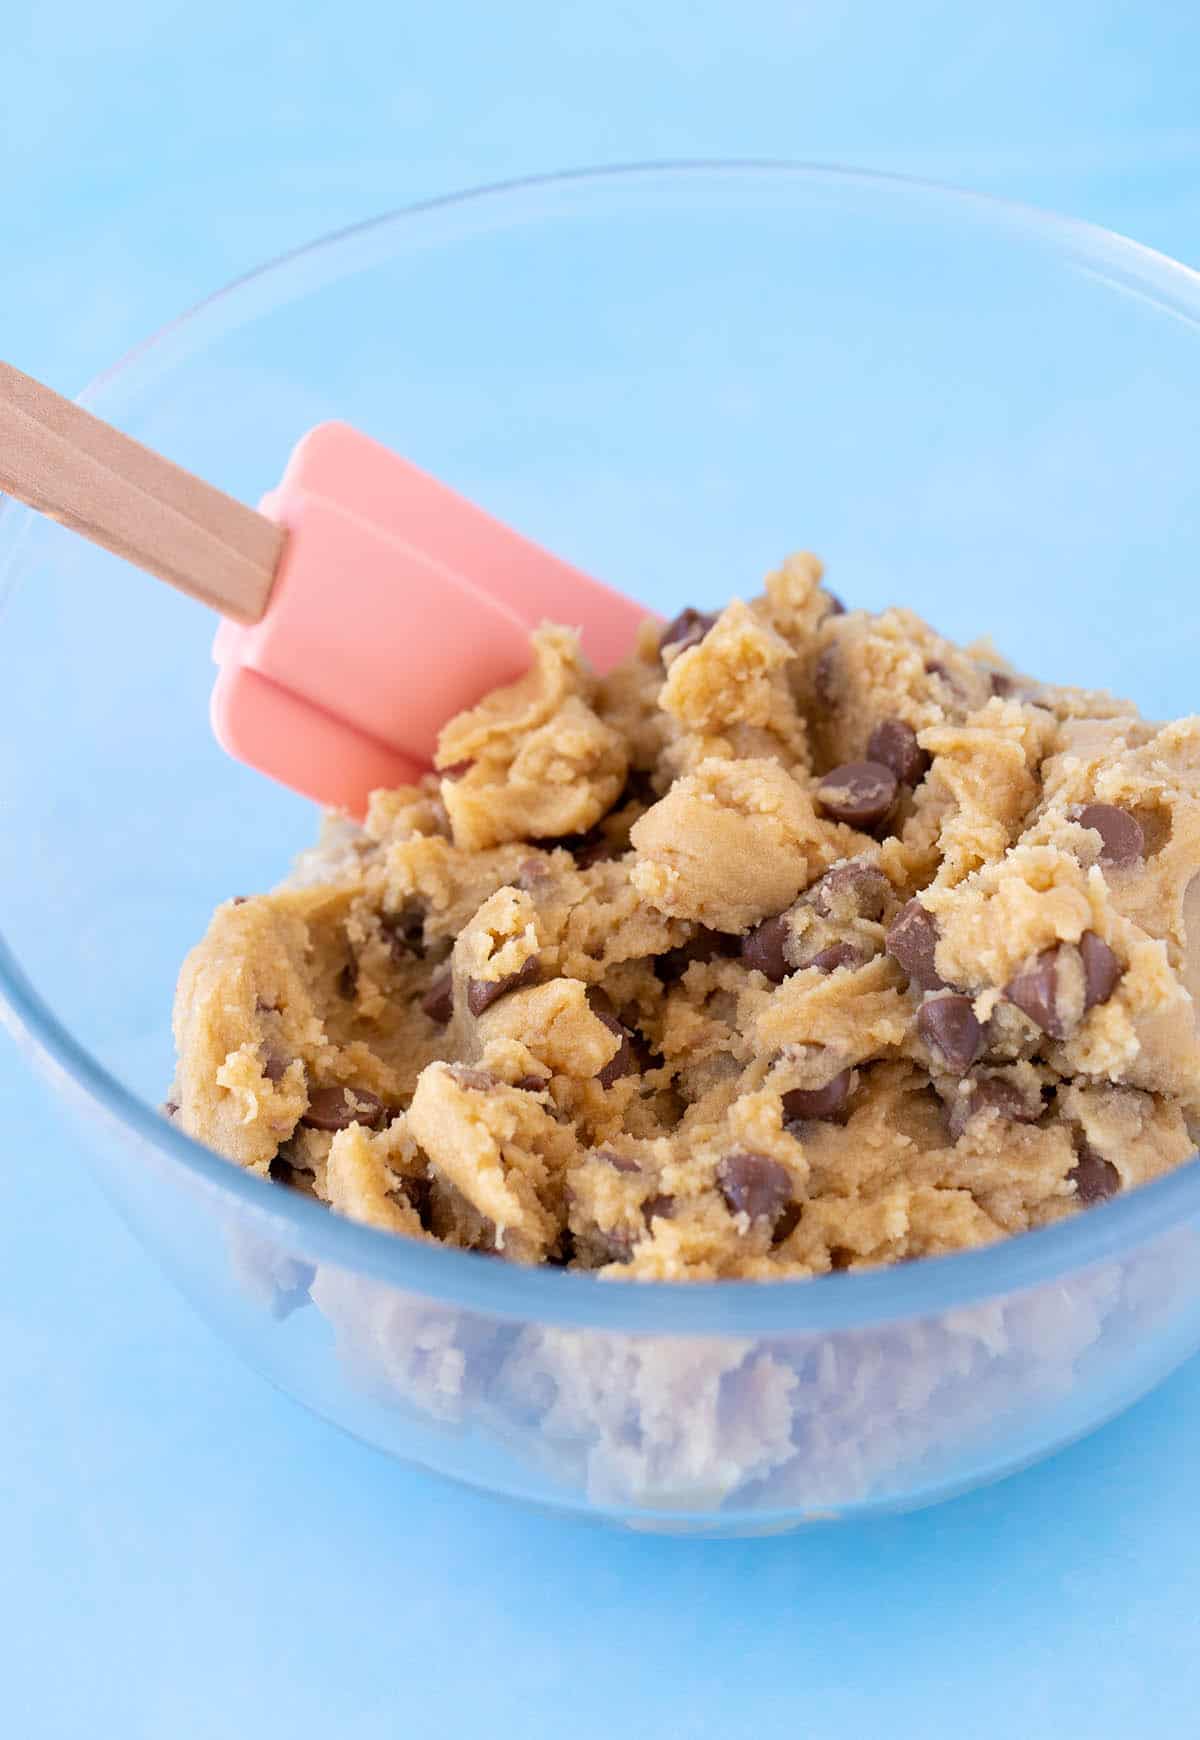 A glass bowl of chocolate chip cookie dough